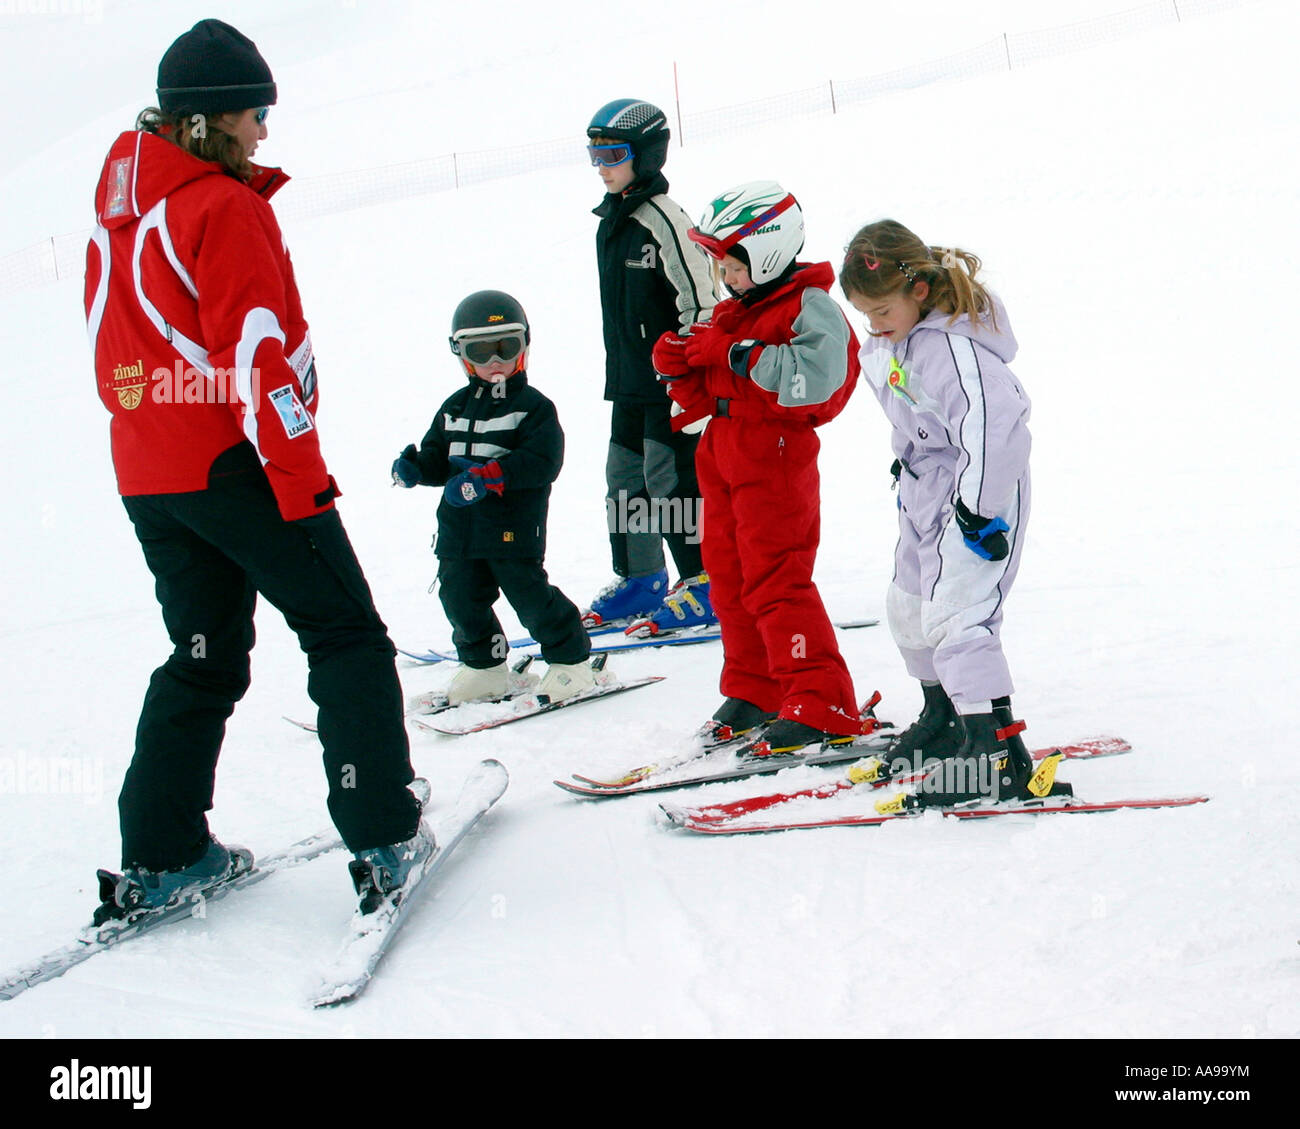 Zinal ski instructress with a group of young kids on short skis about to start their lesson Stock Photo